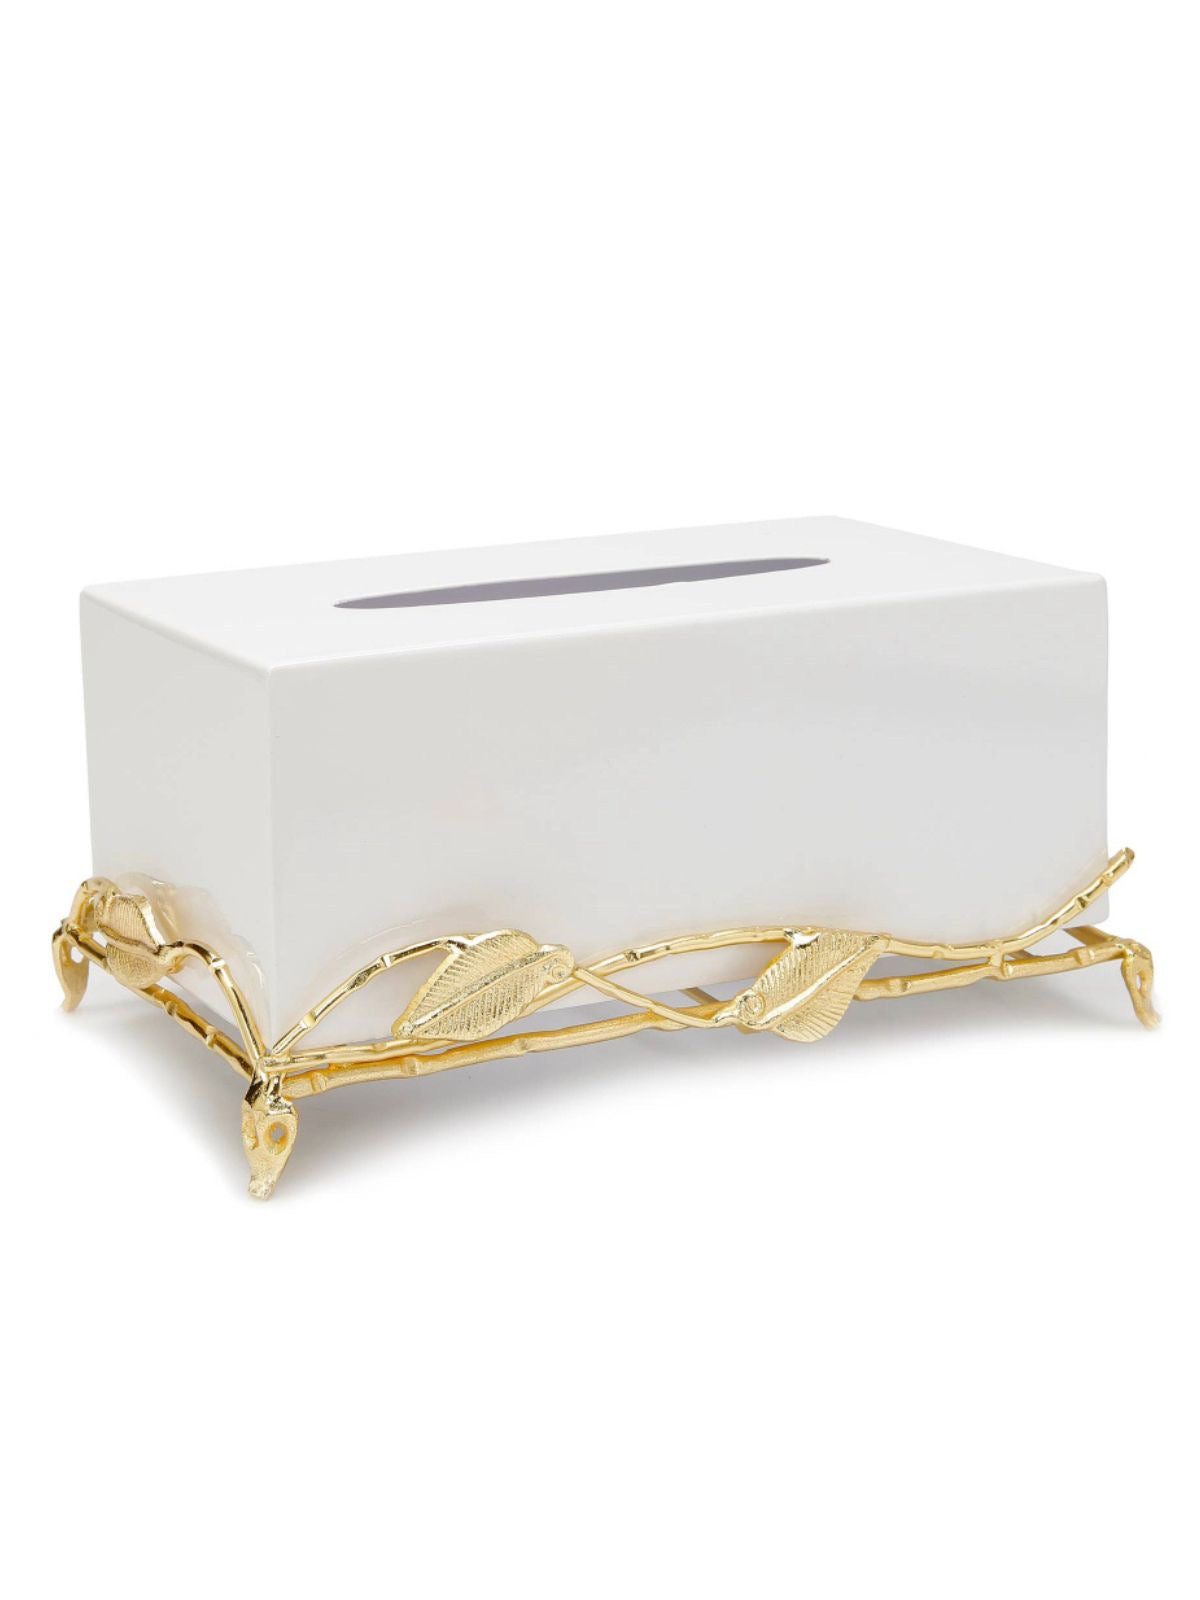 10in x 5.8in white marble tissue box holder on gold leaf design base sold by KYA Home Decor